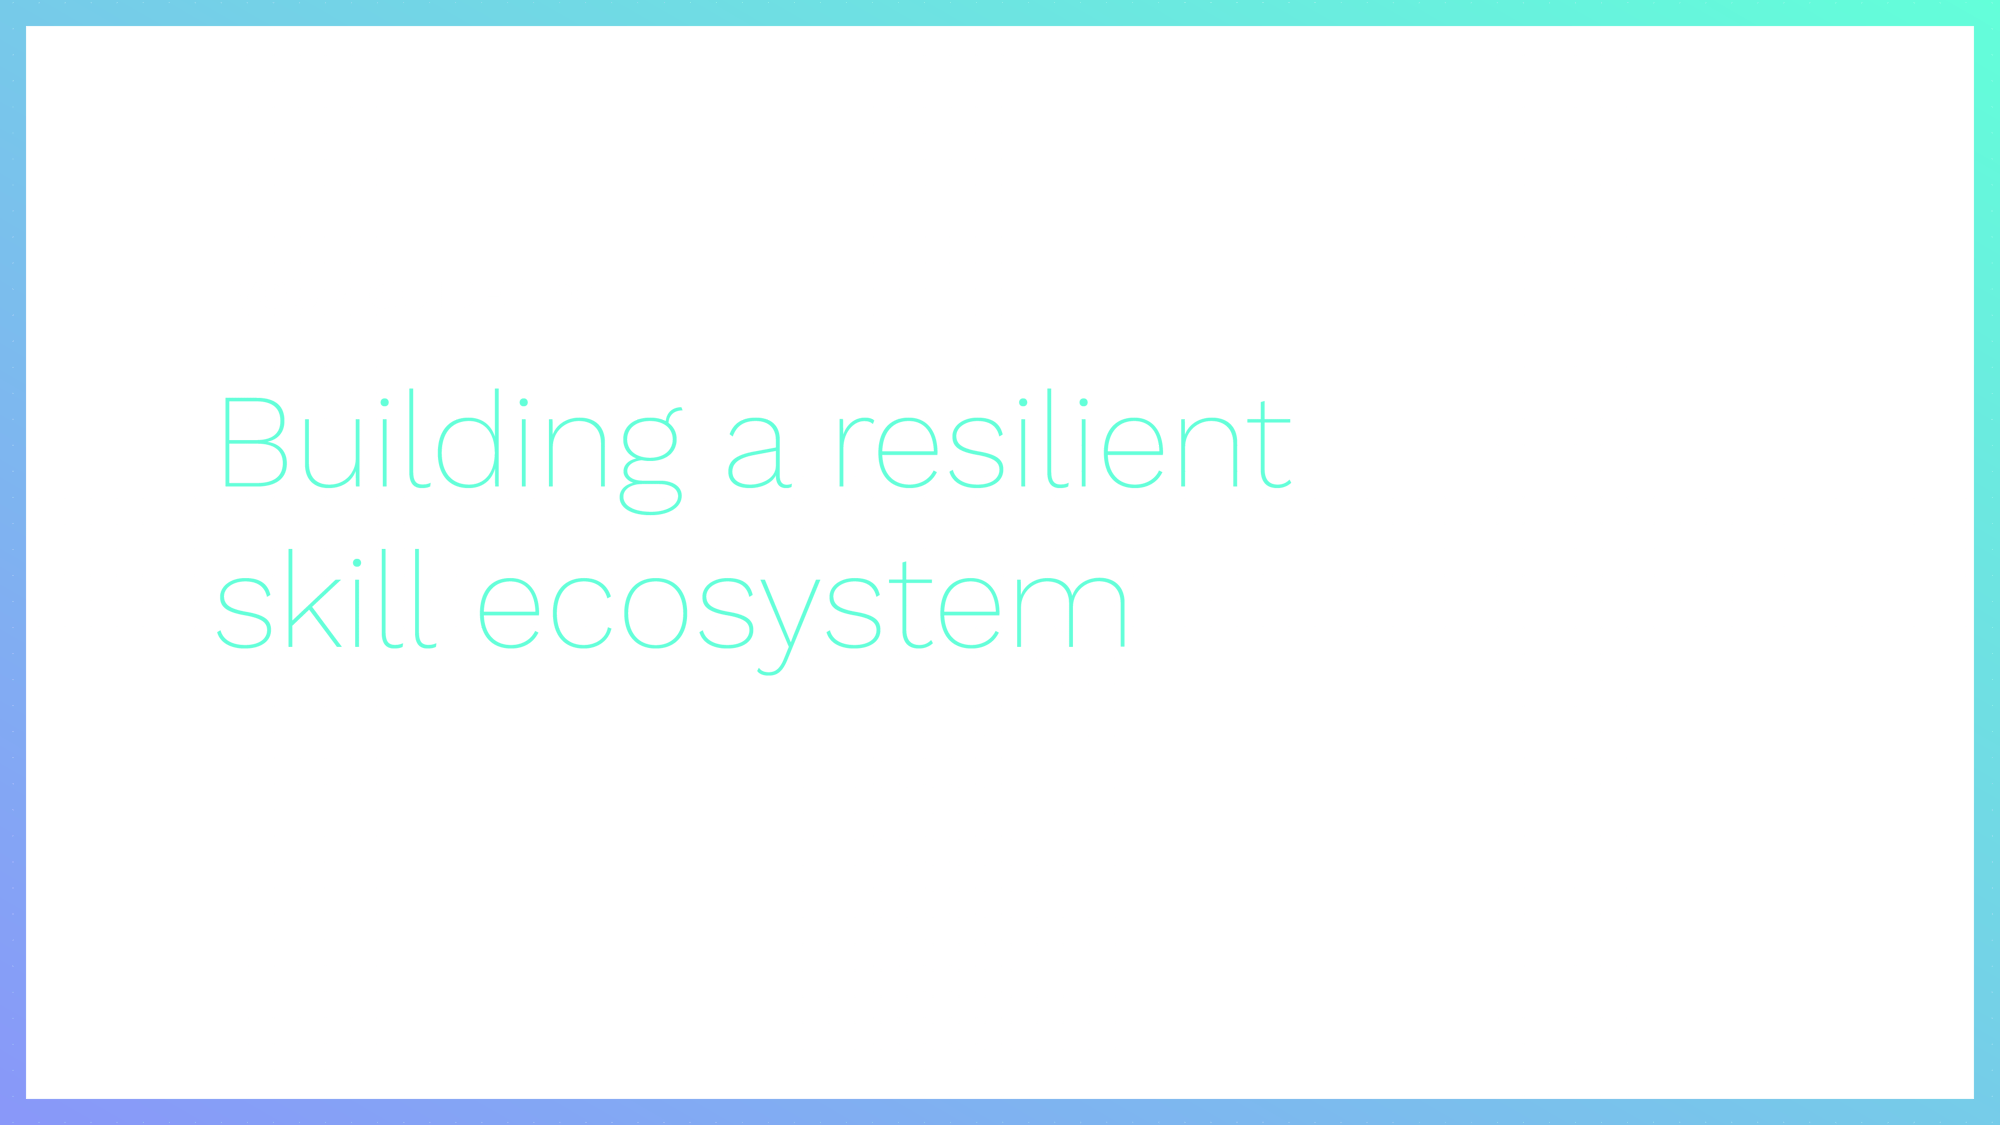 Guide: Building a resilient skill ecosystem